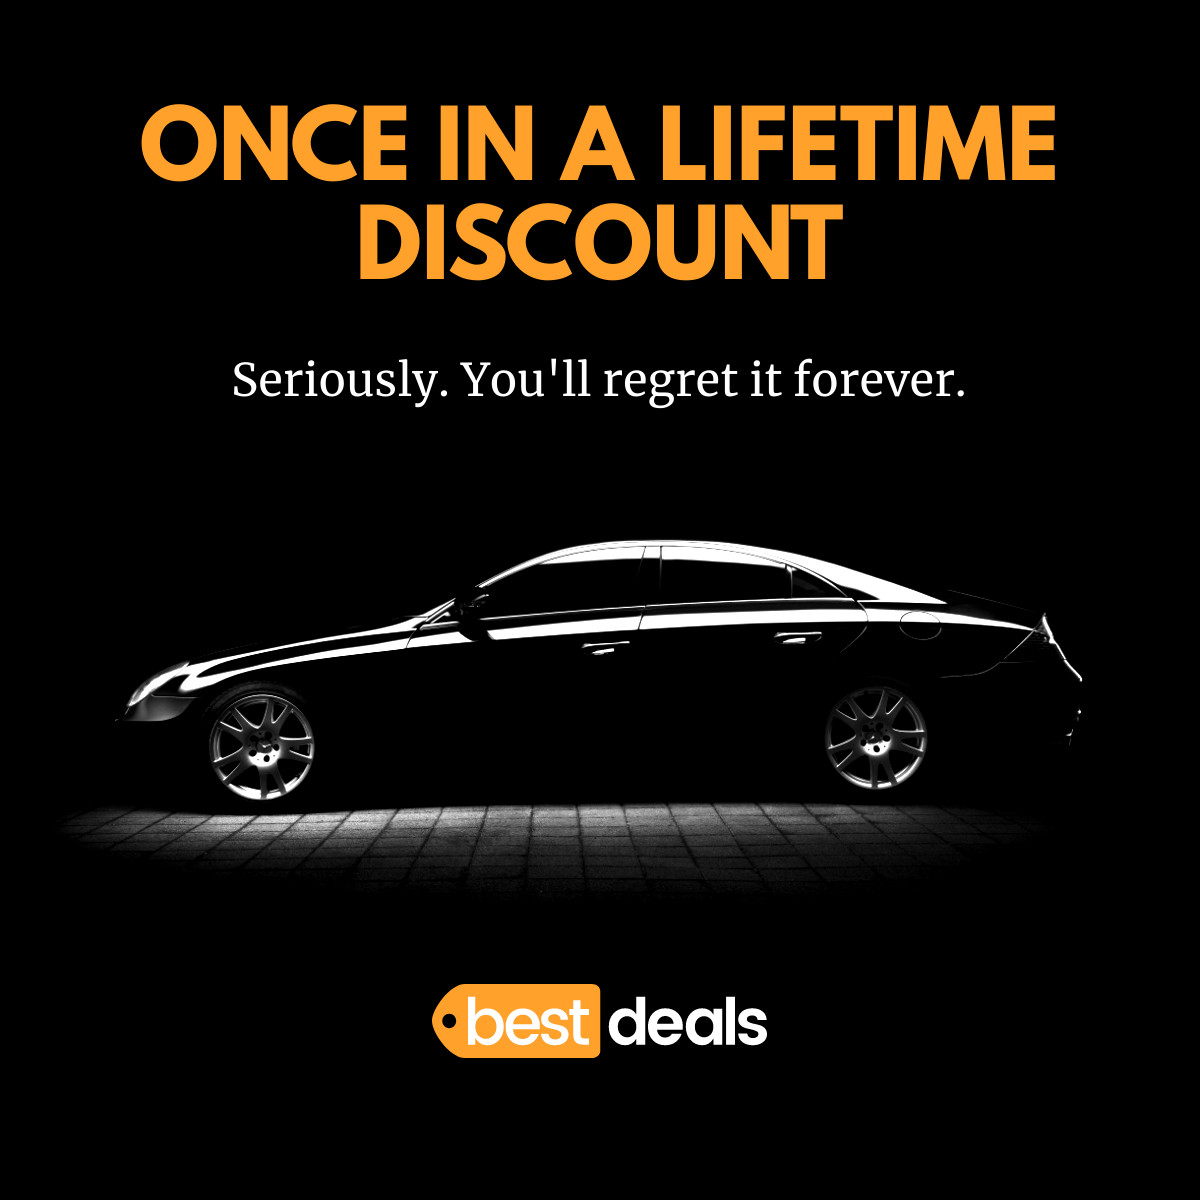 Once in a Lifetime Halloween Auto Discount Inline Rectangle 300x250